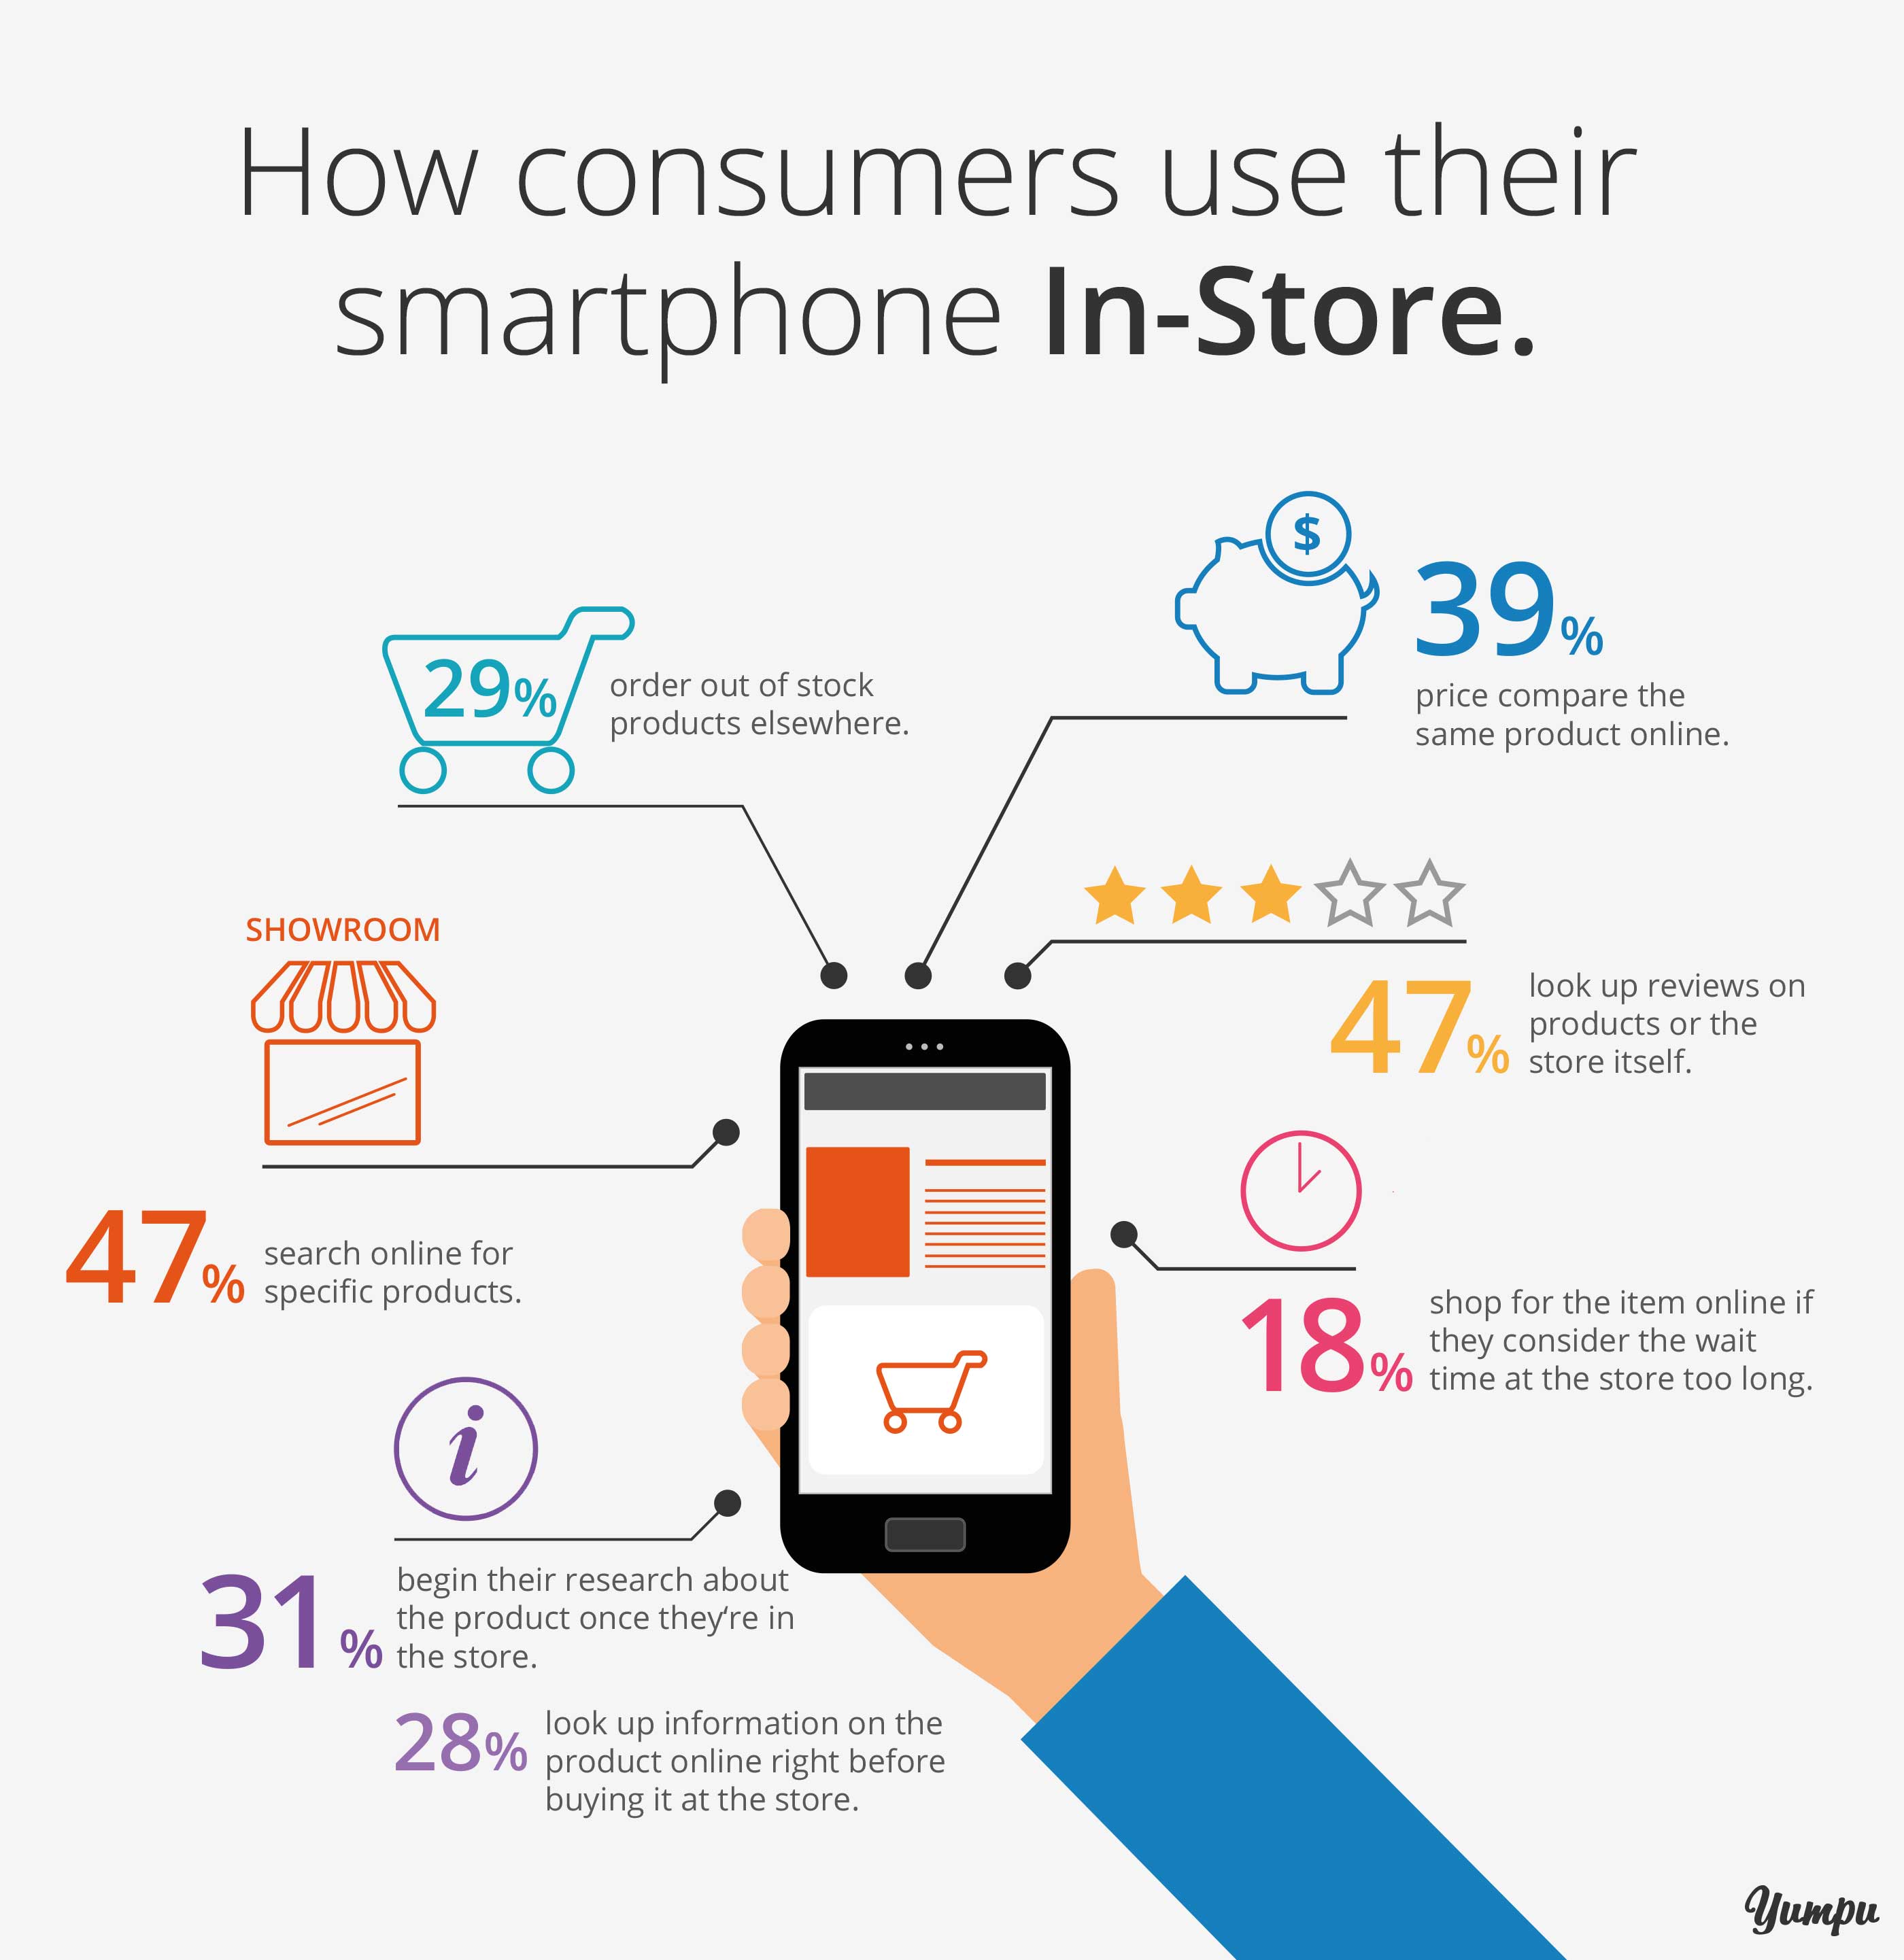 Mobile Internet use - how smartphone owners use their cell phones in a shop